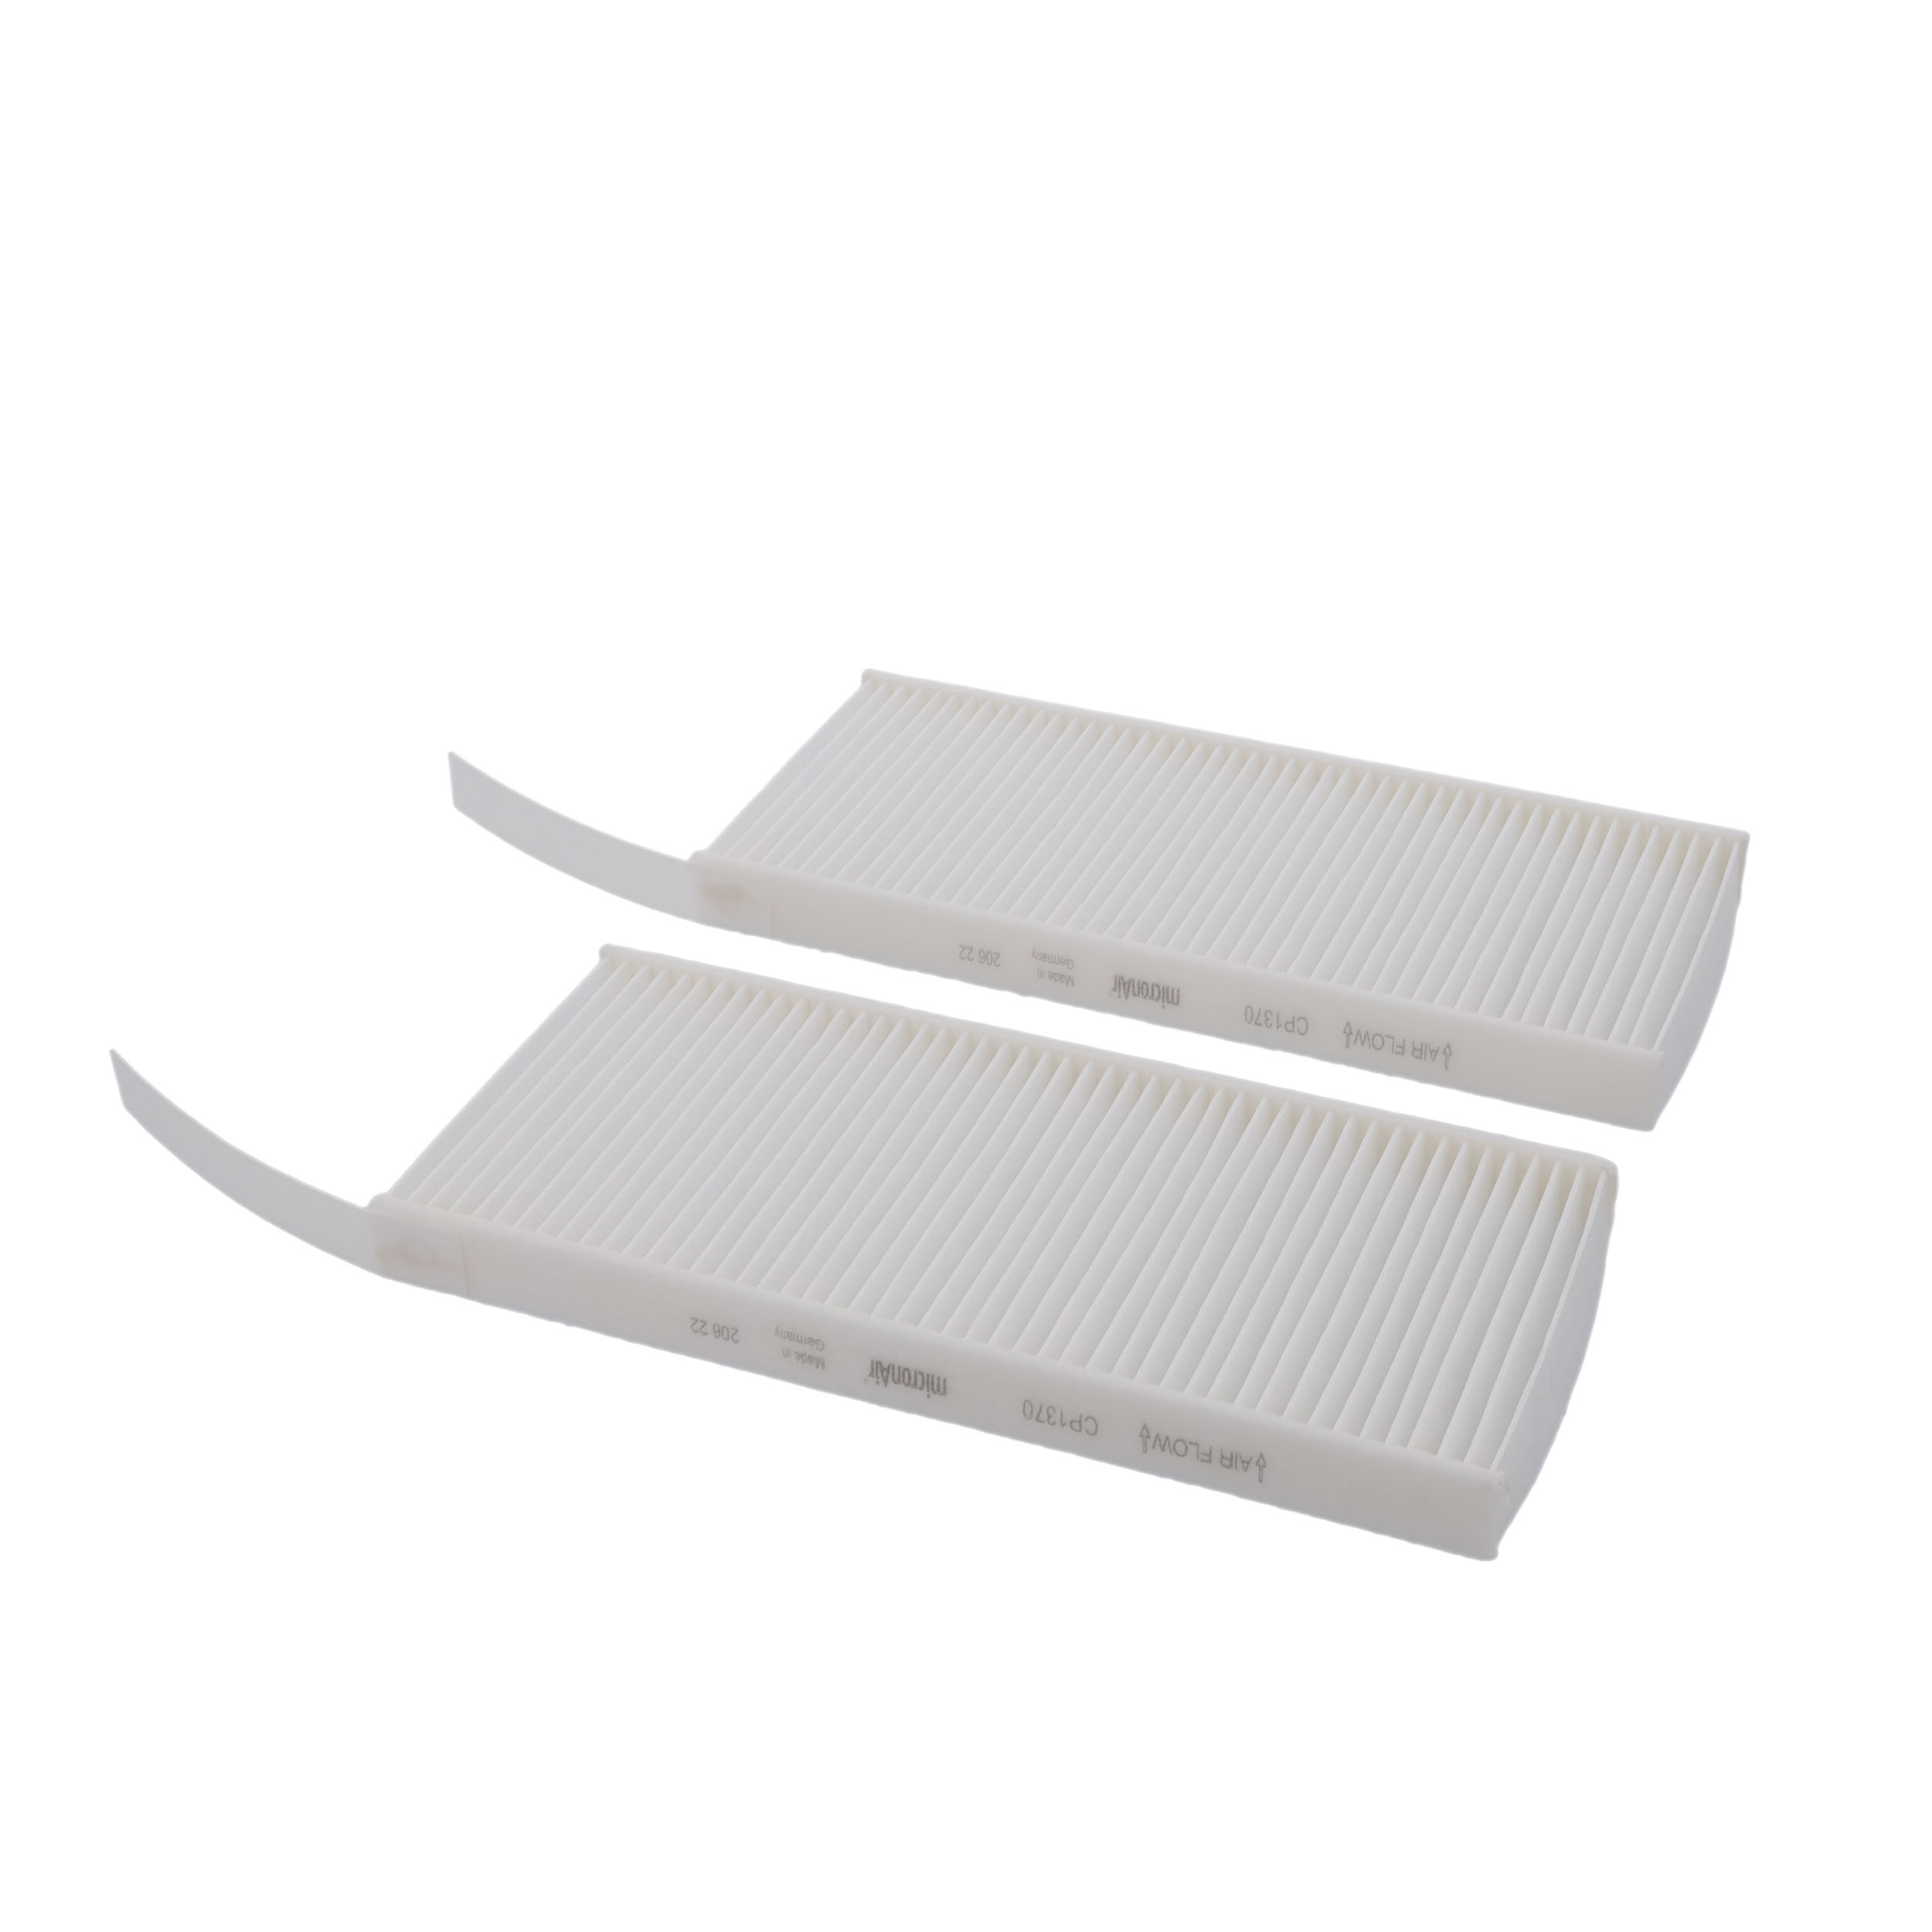 CORTECO Particulate Filter, 239 mm x 108 mm x 20 mm, without holder Width: 108mm, Height: 20mm, Length: 239mm Cabin filter 80001456 buy